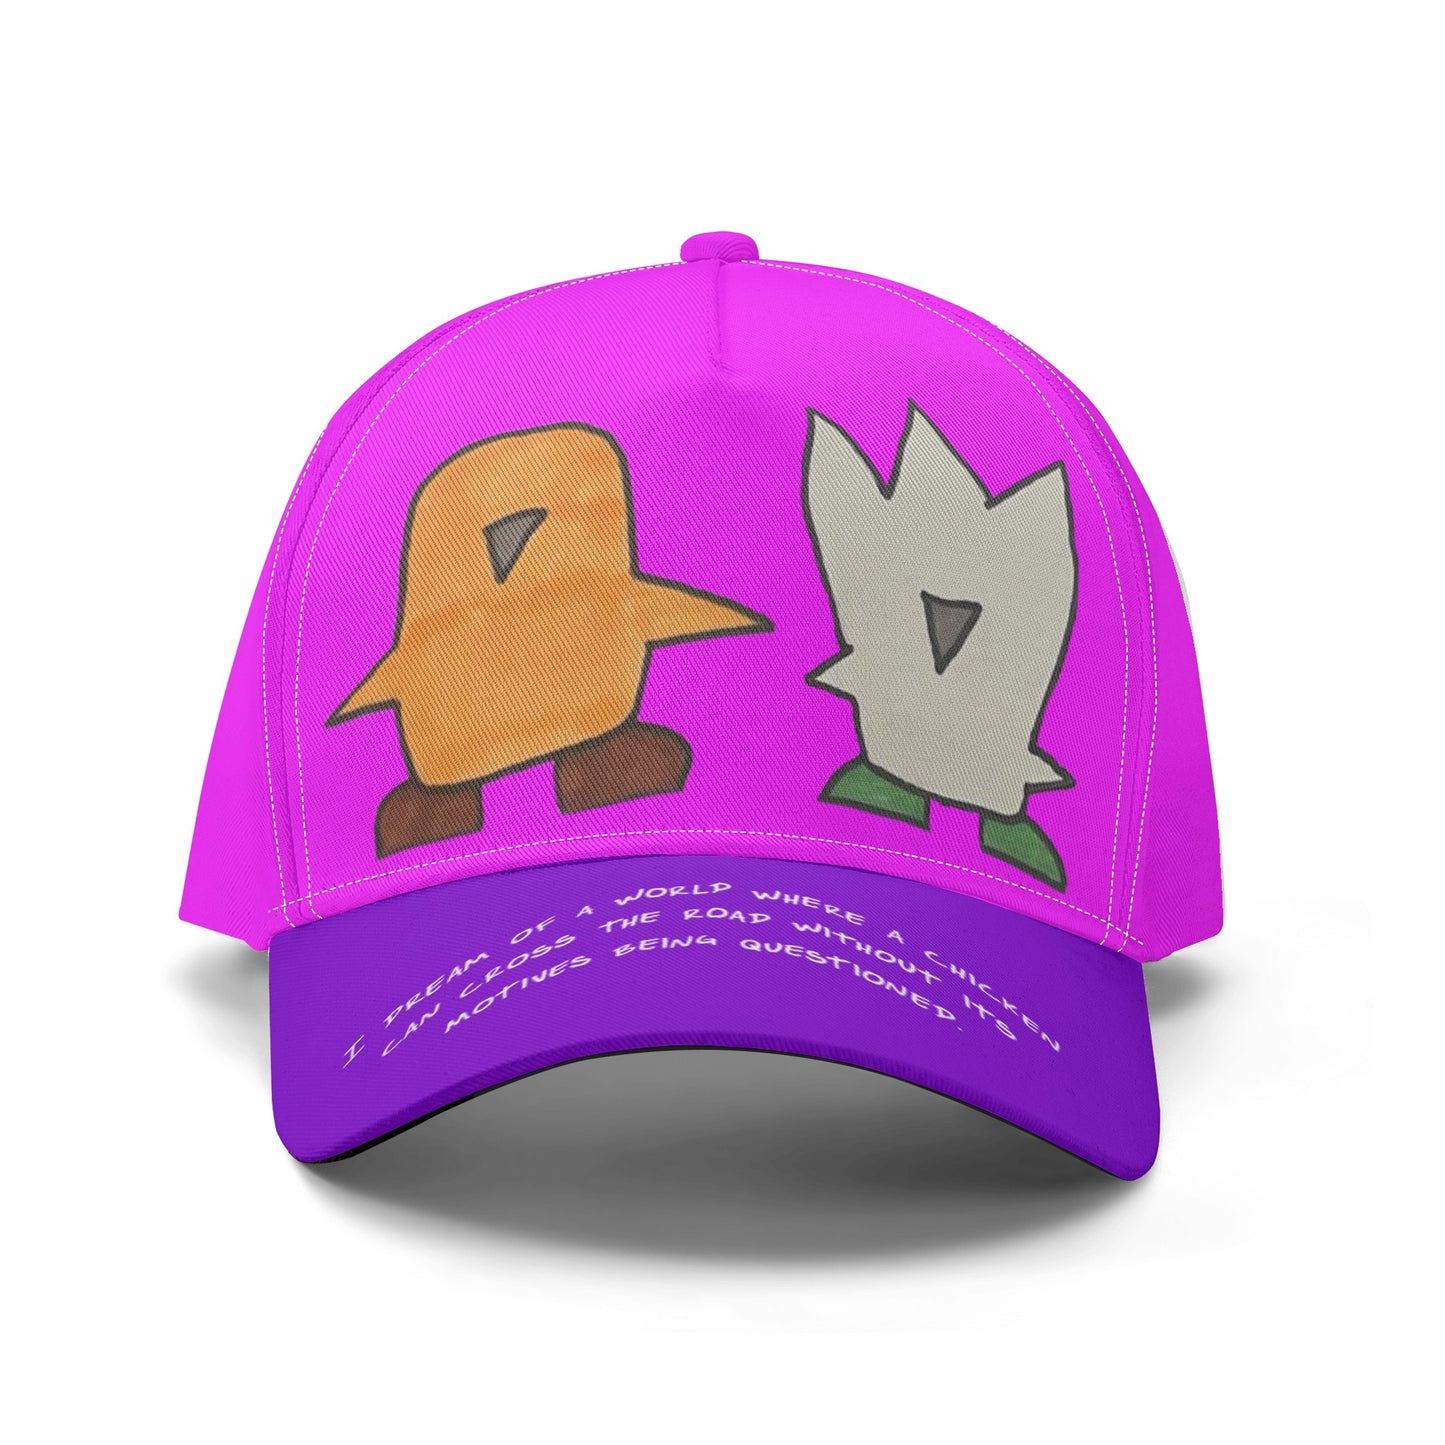 'I dream of a world' Baseball Cap with Fuzzy and Muffin artwork by DB  Pink/Purple